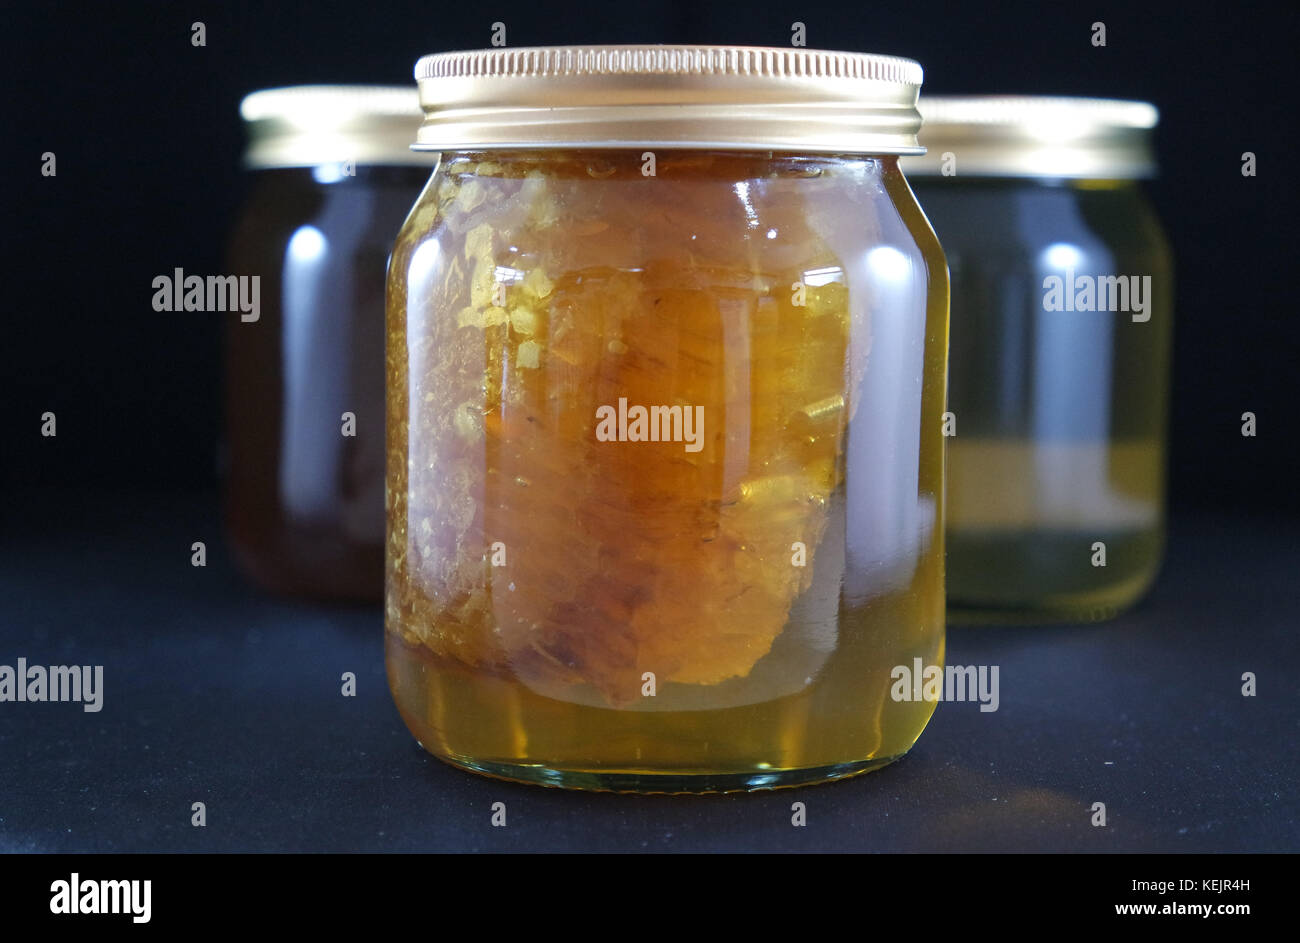 Jar of Honey with bees wax comb Stock Photo